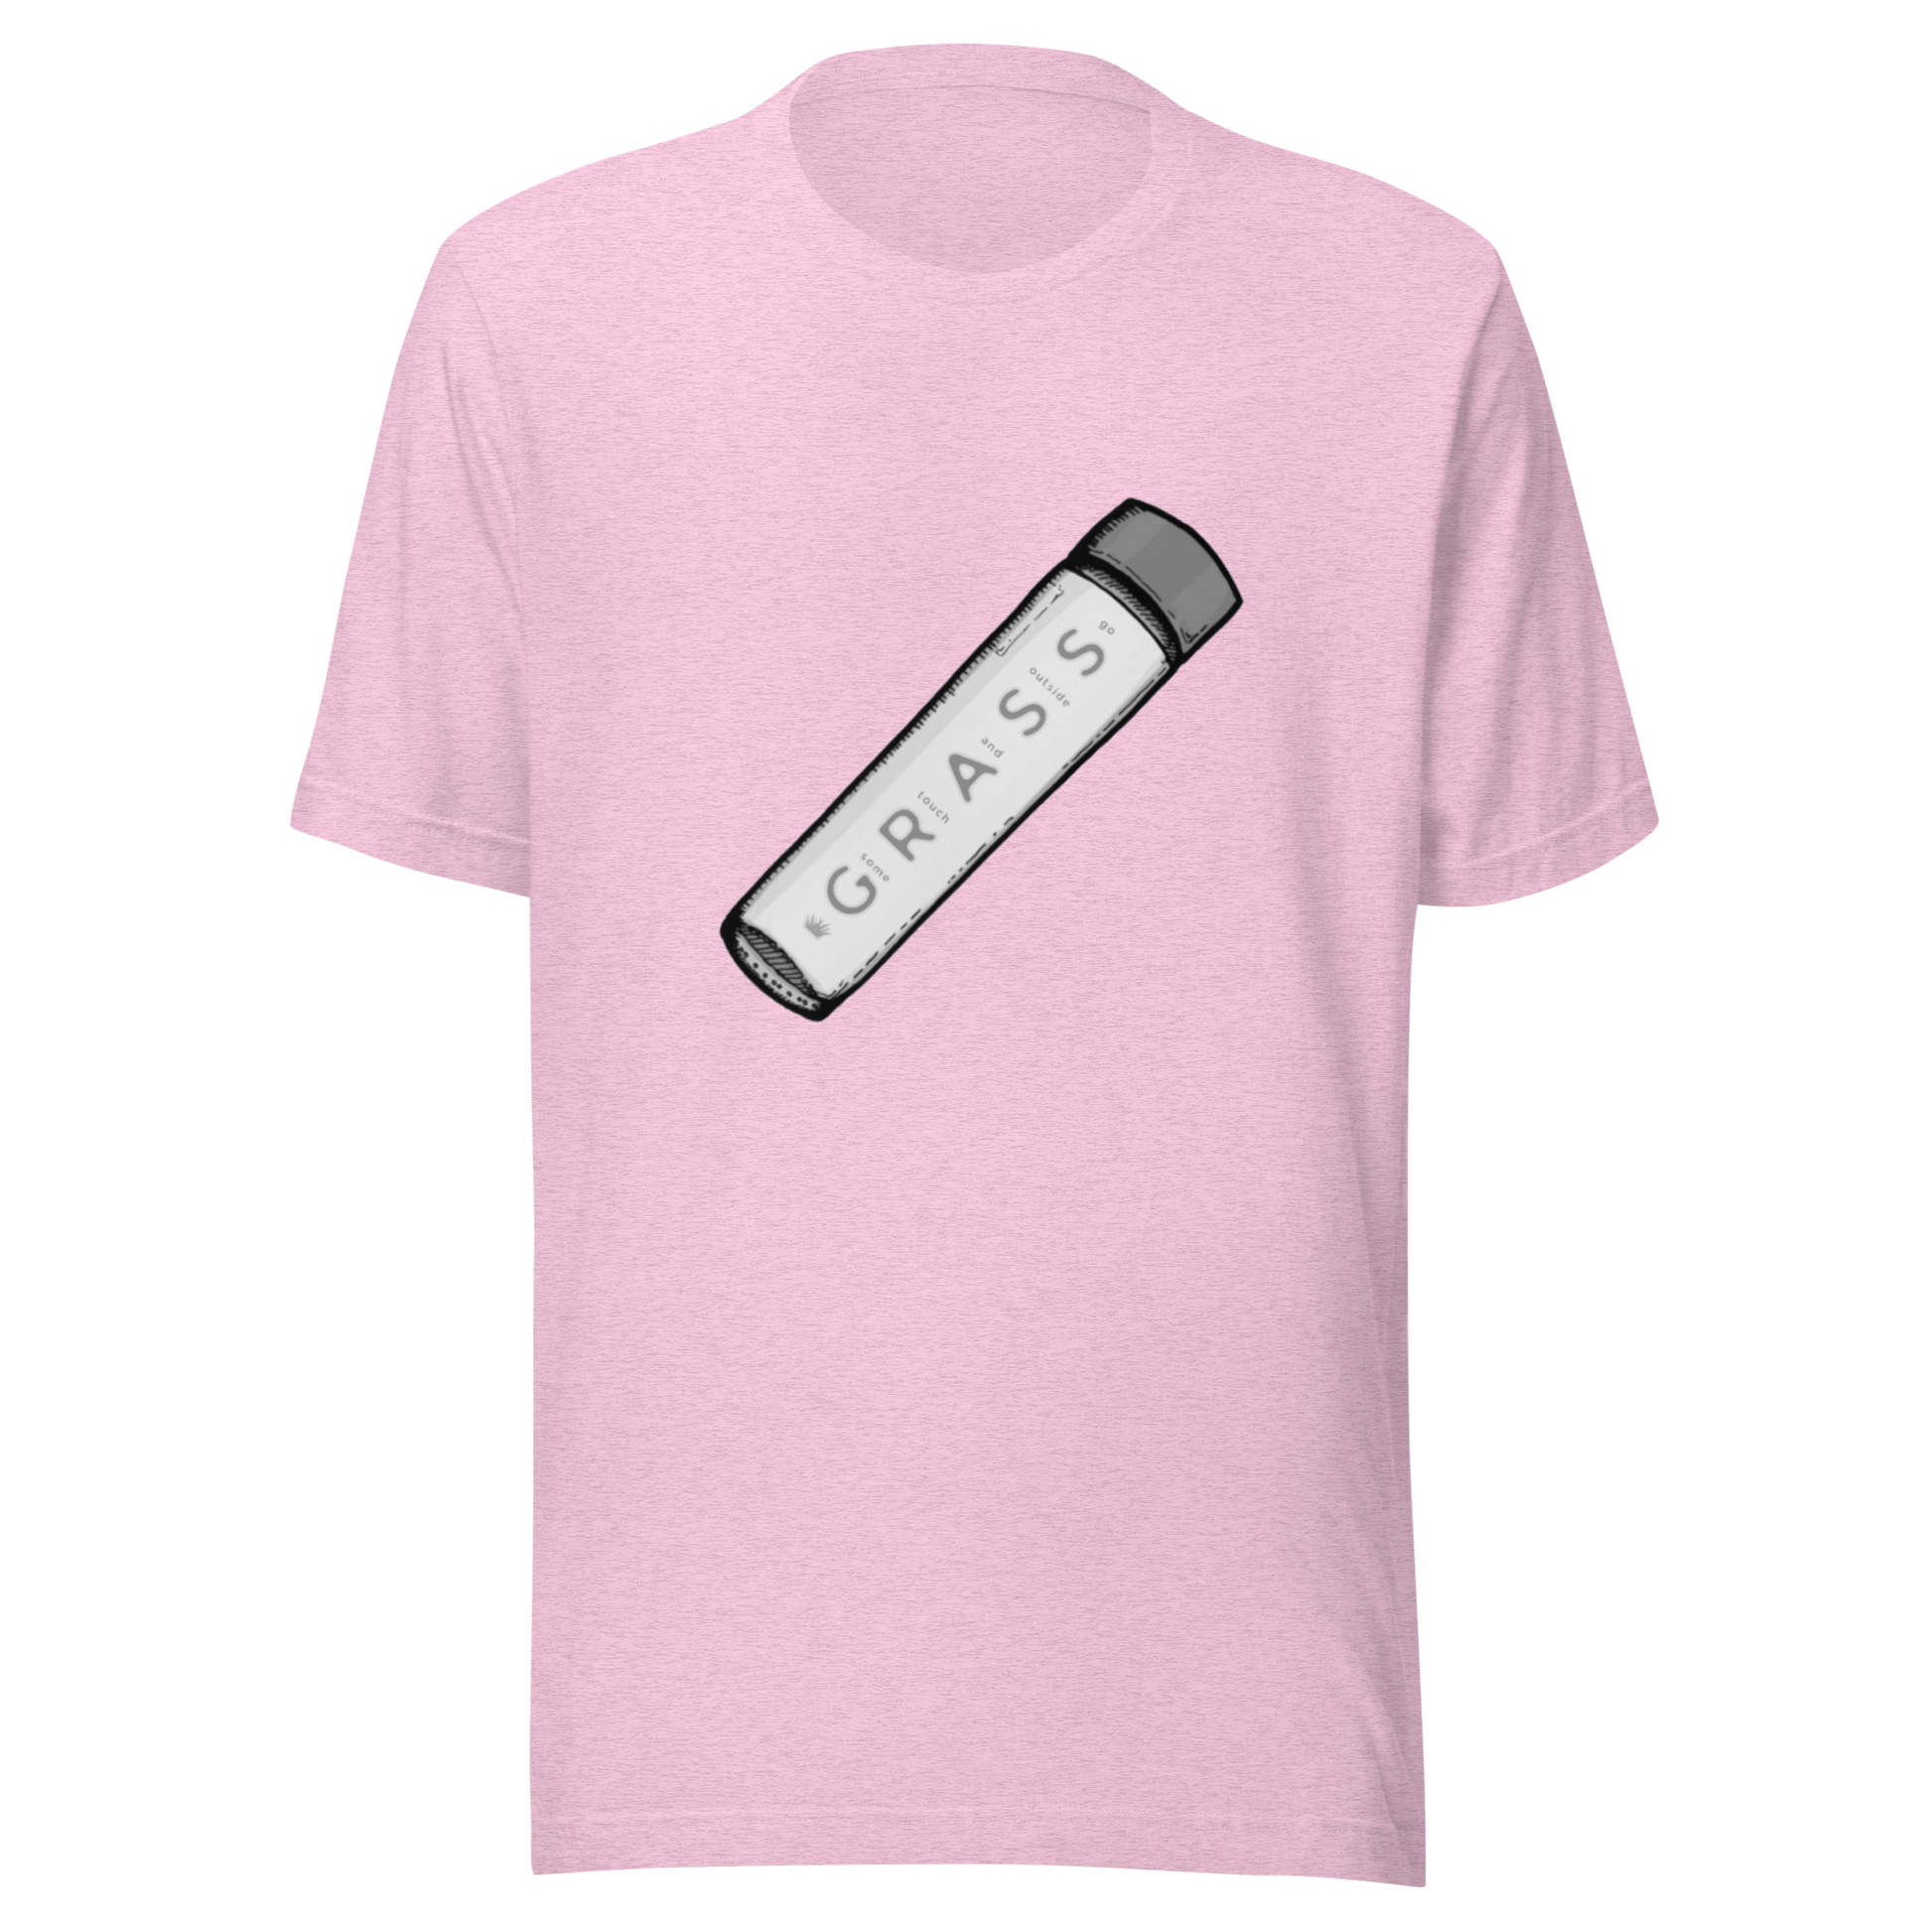 touch some grass t-shirt in pink - gaslit apparel